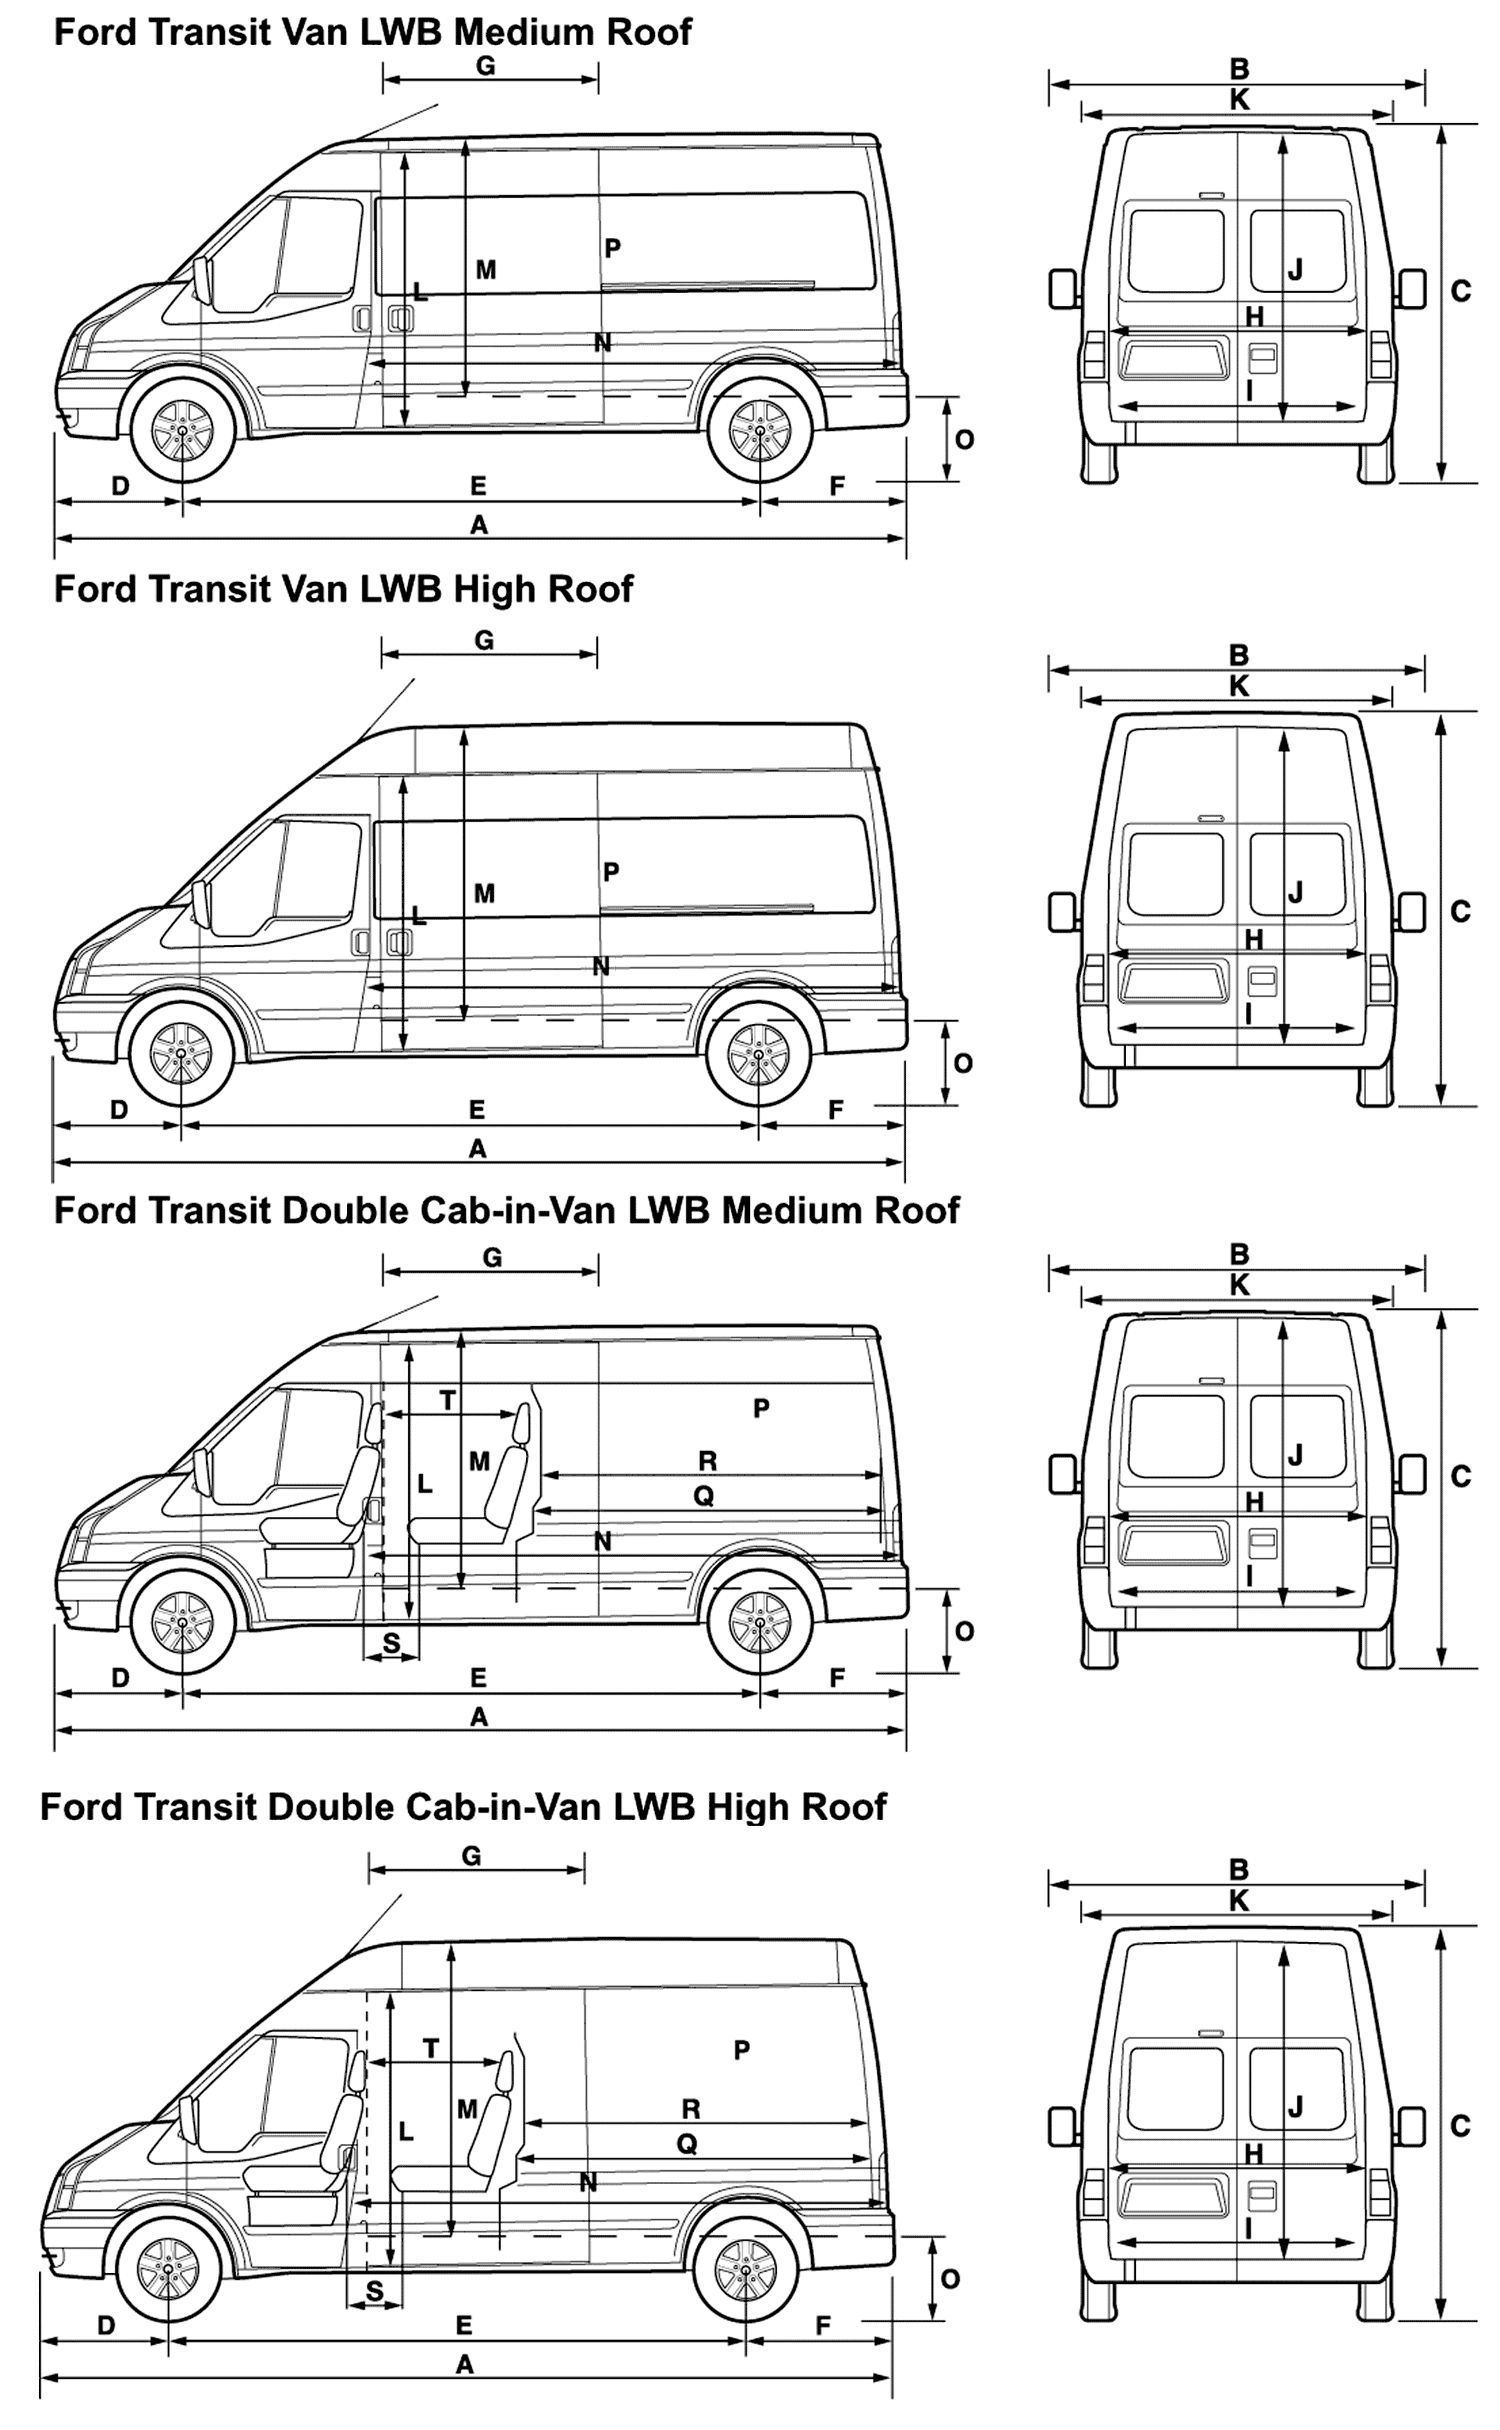 Templates - Cars - Ford - Ford Transit LWB extended length